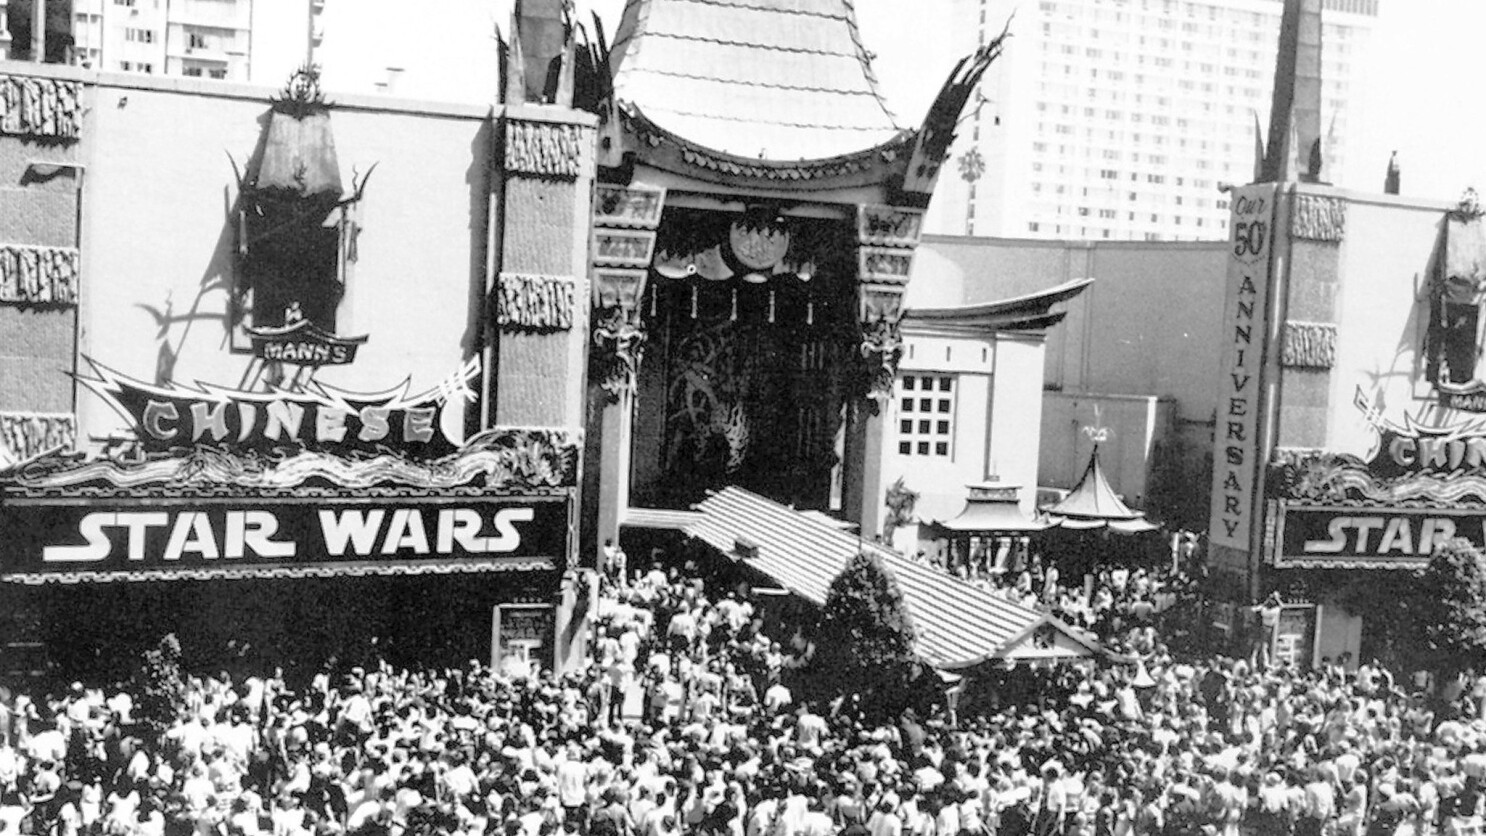 Analysis: In the &#39;Star Wars: The Force Awakens&#39; unveiling, 1977 meets 2015 - Los Angeles Times